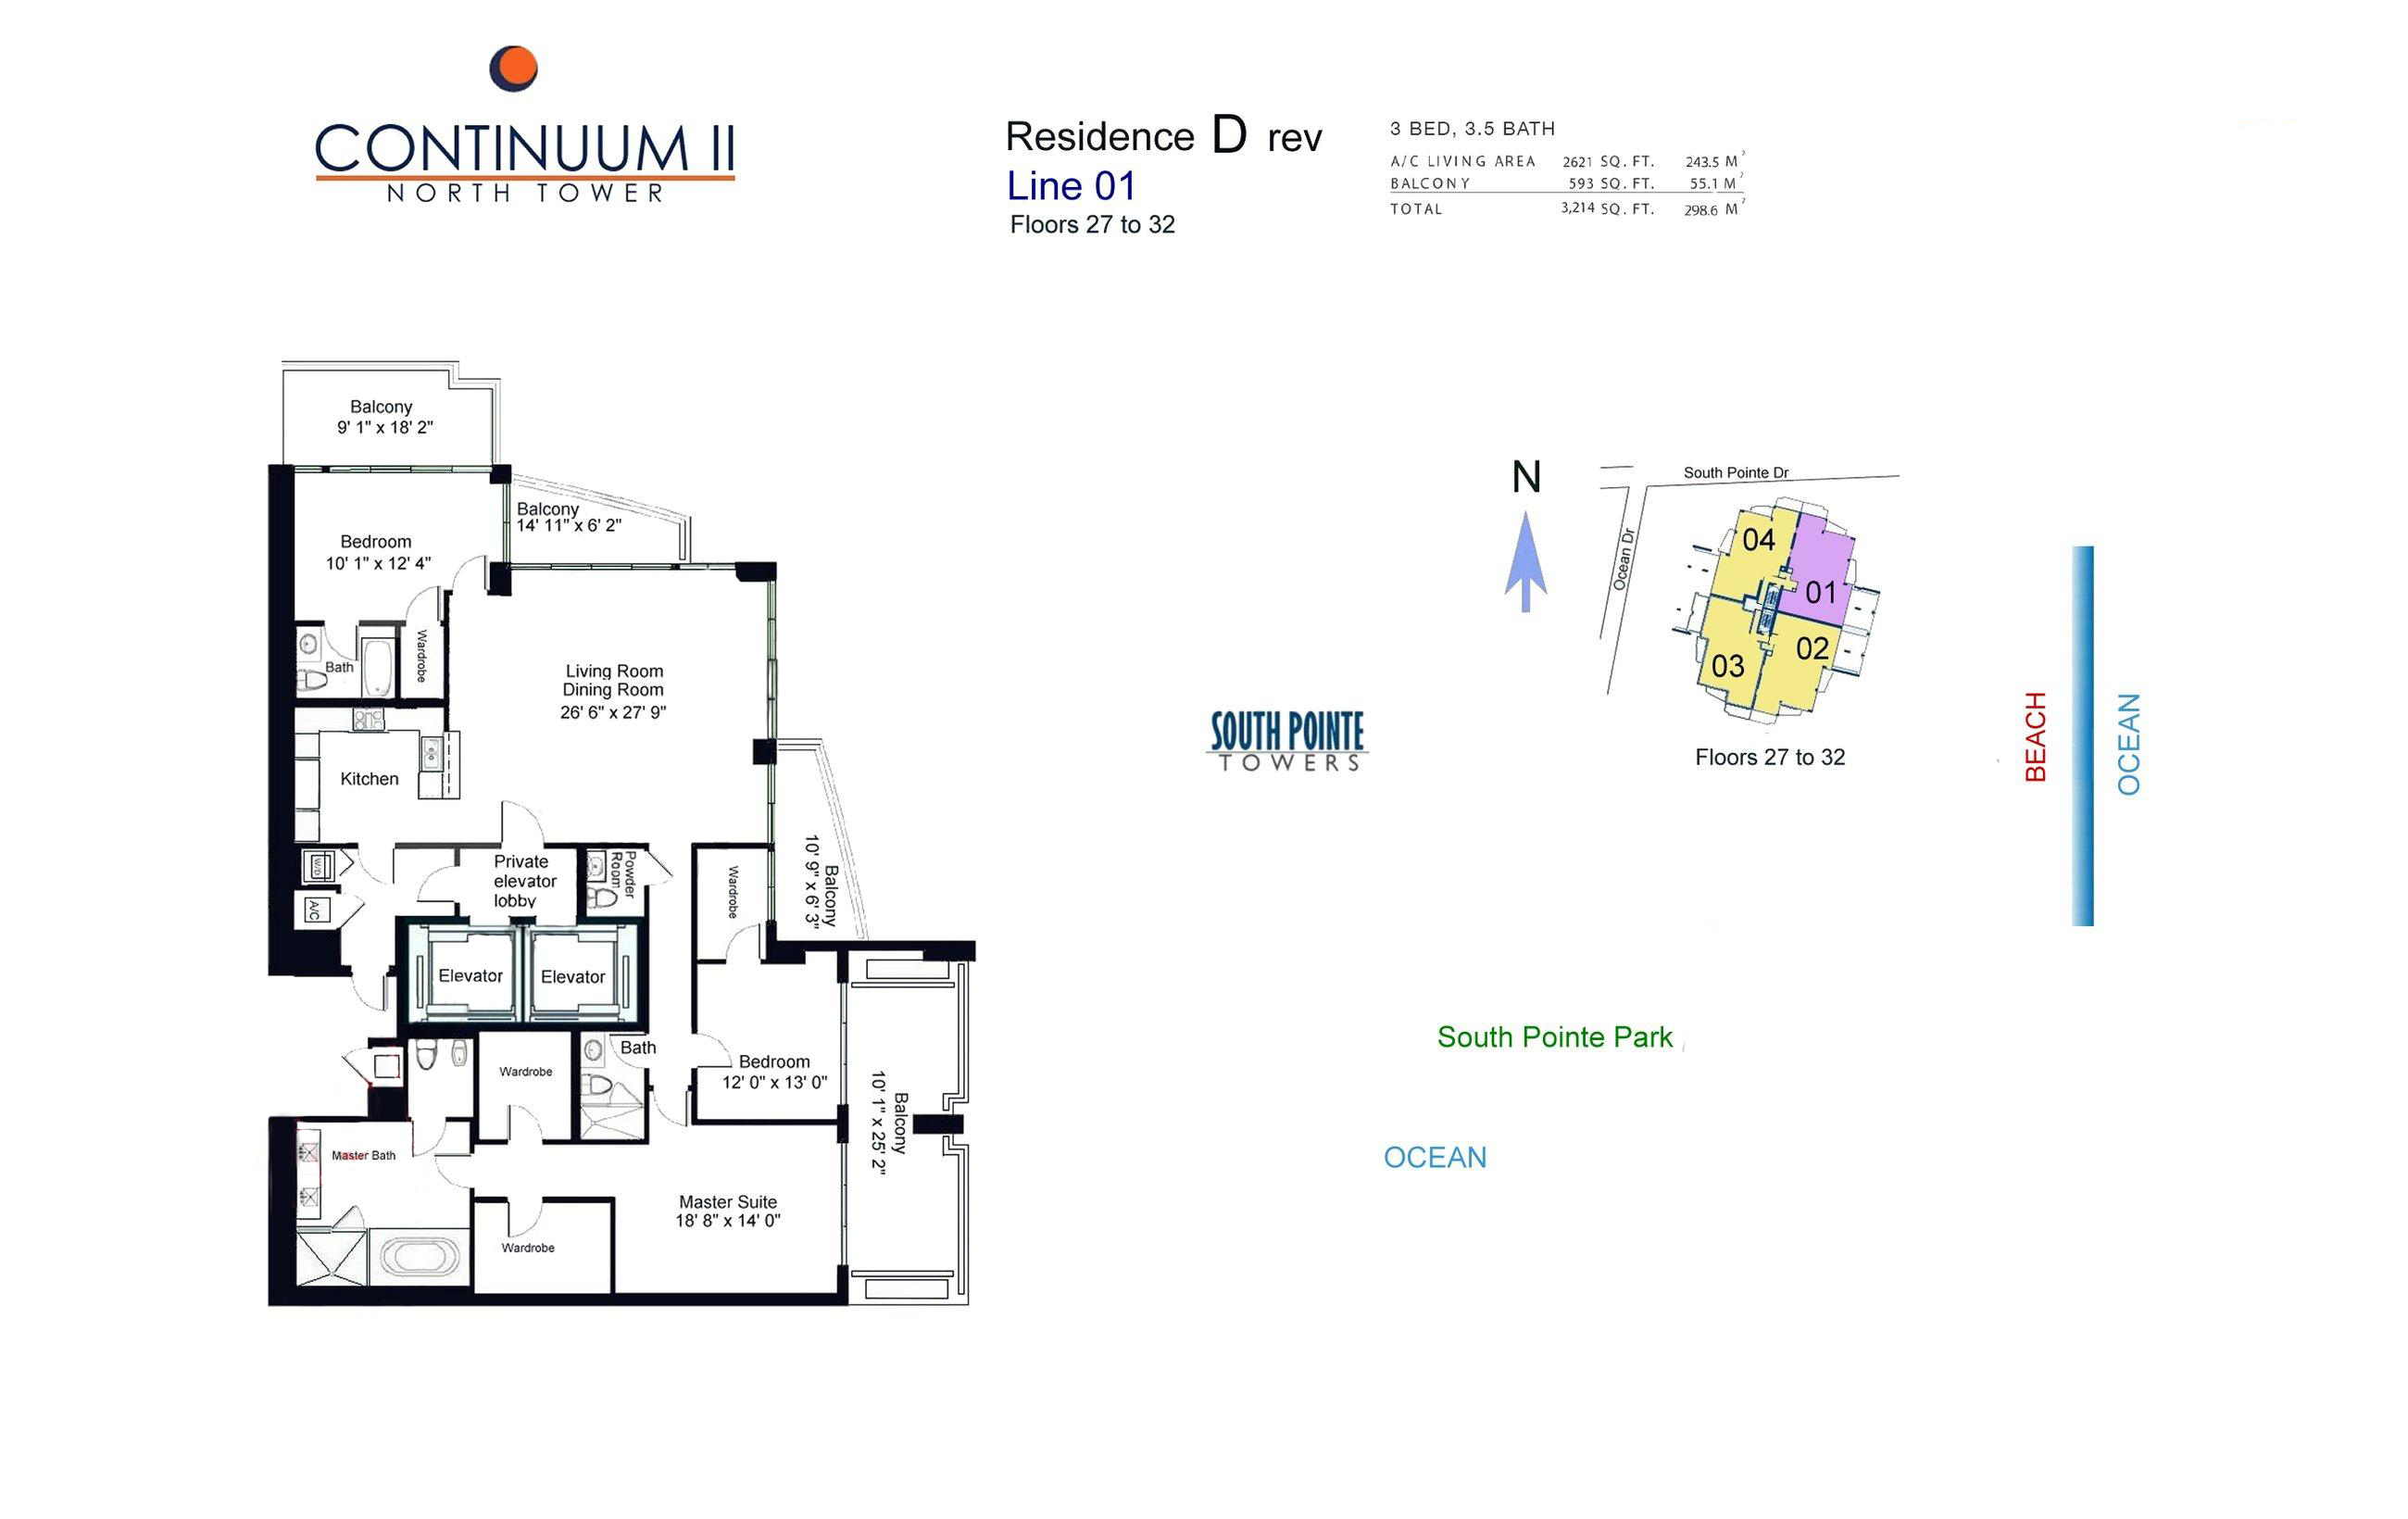 Continuum North Tower Residence D rev Line 01